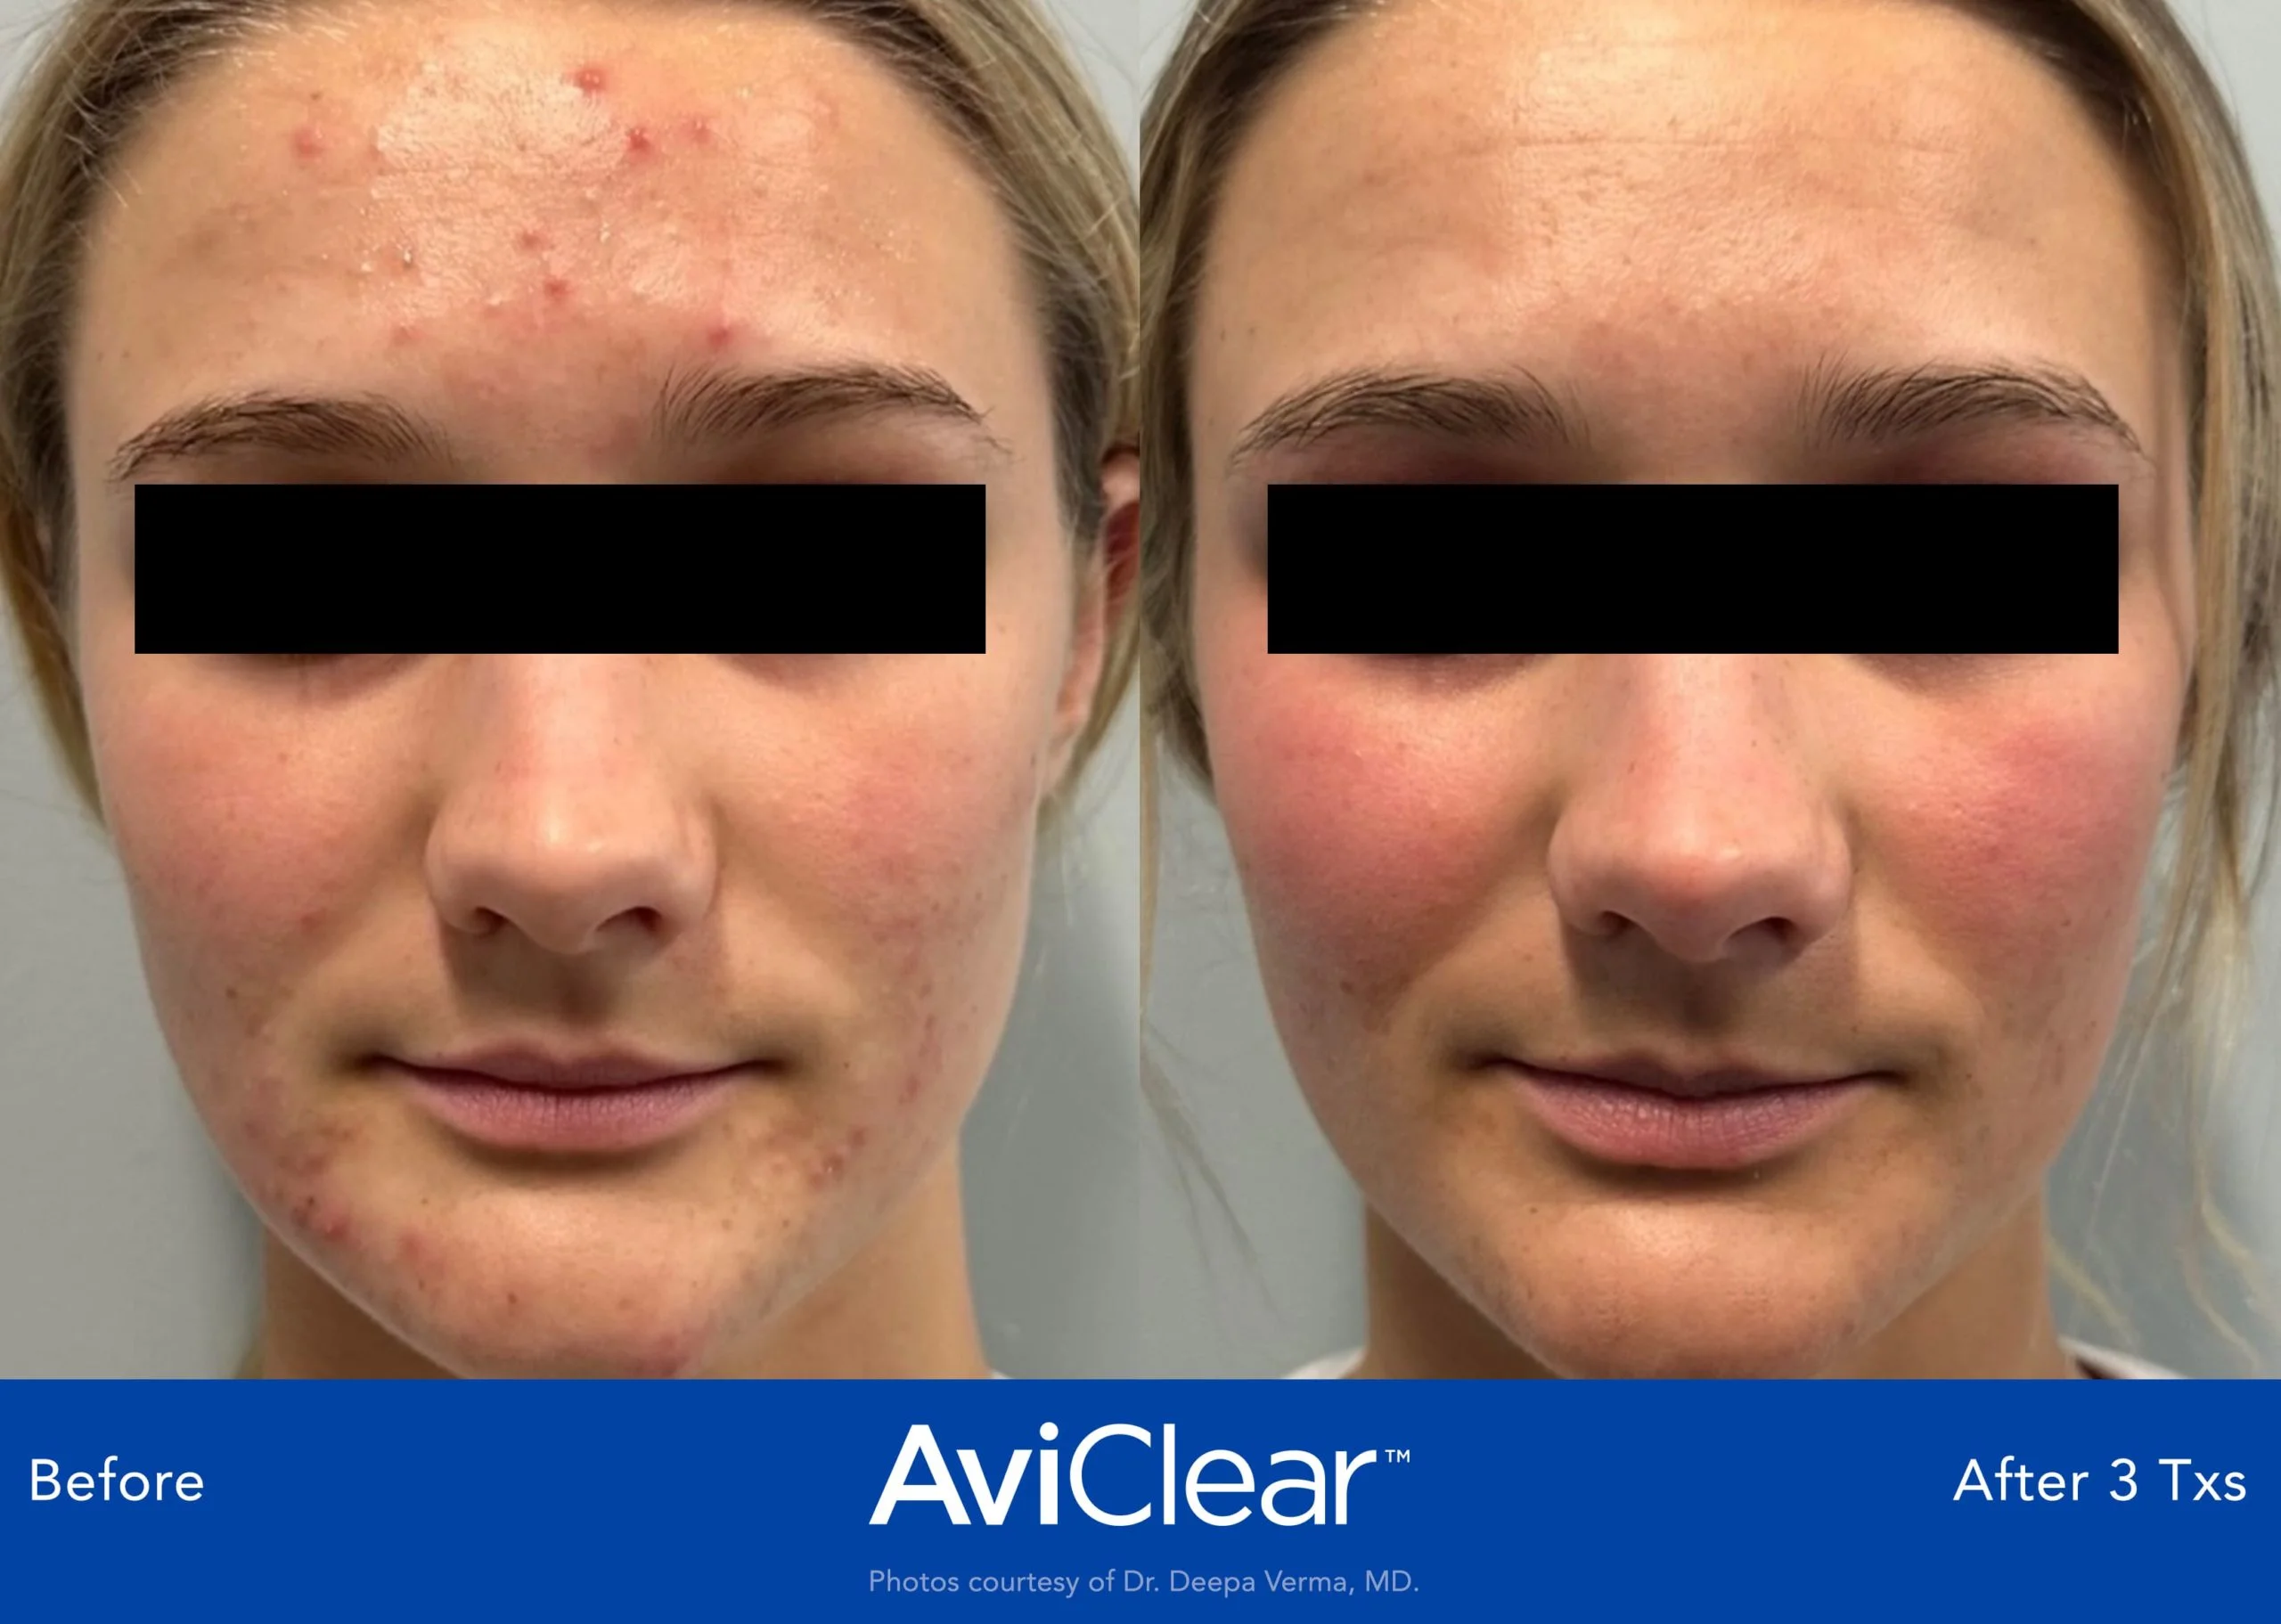 AviClear-Before-and-After-three-years-Live-Vibrant-Wellness-and-Aesthetics-in-Boynton-Beach-FL